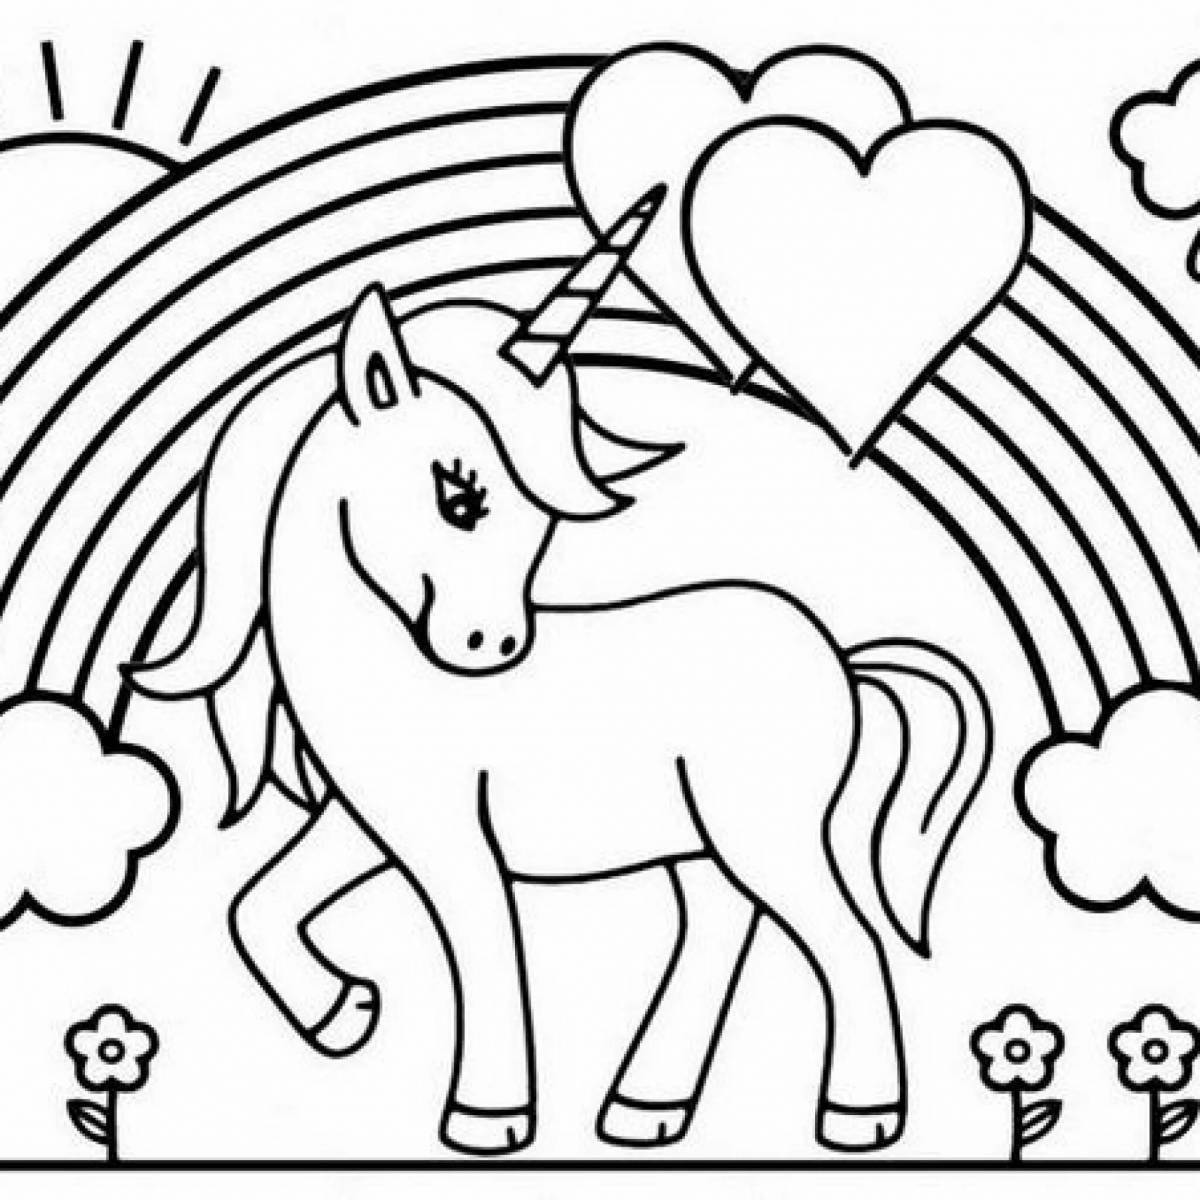 Adorable unicorn coloring book for kids 4 5